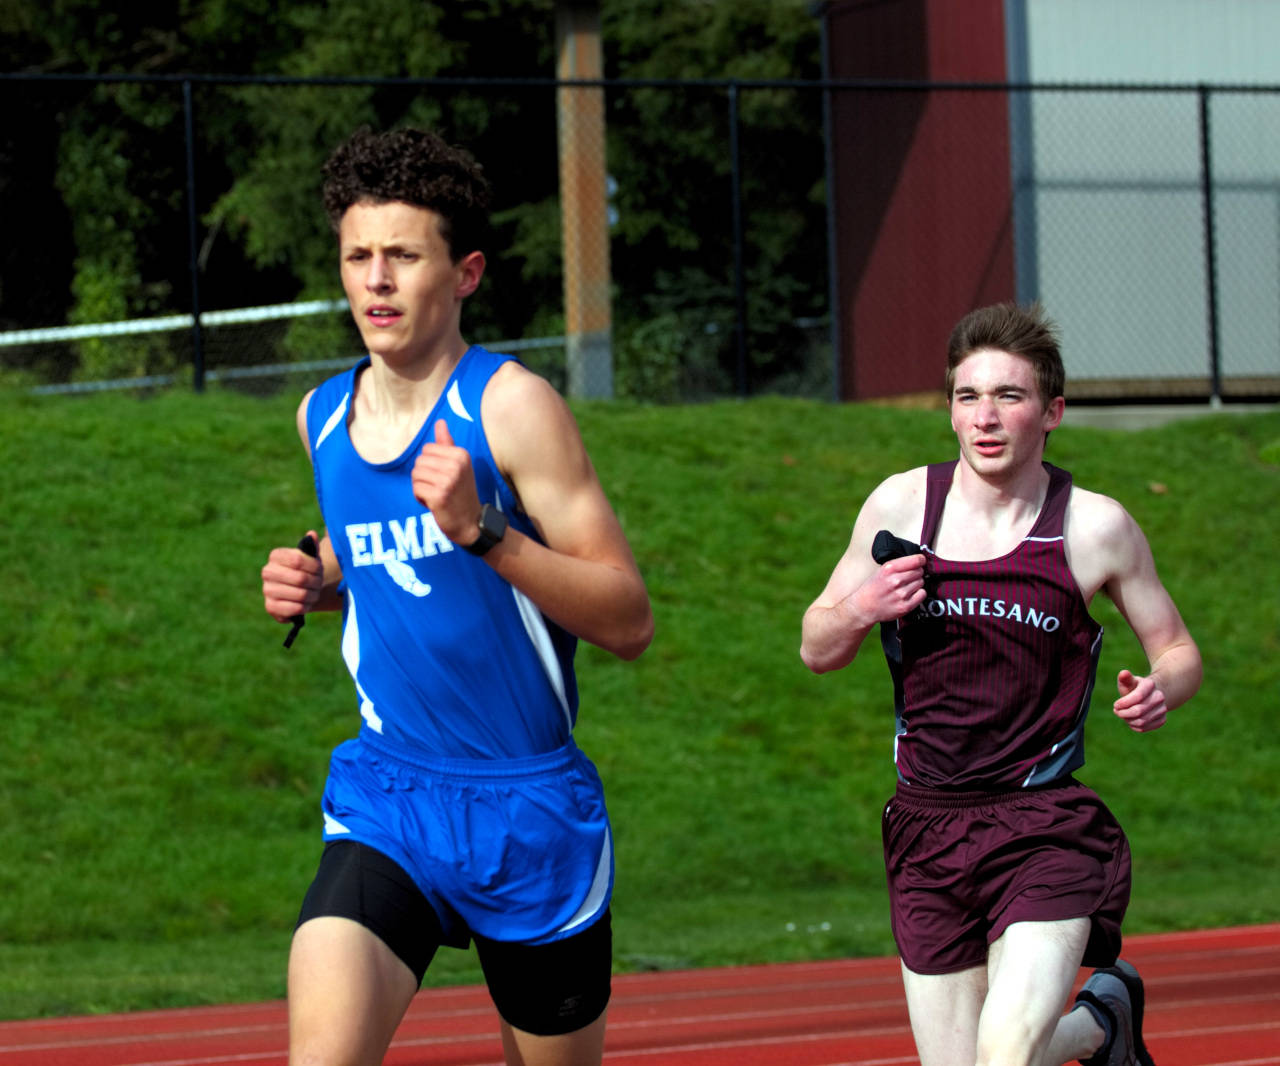 Elma sophomore Elijah Flores, left, leads Montesano’s Aric Jacklin during the boys 1,600 meter race during a 1A Evergreen League Meet at Montesano on Wednesday. (Ryan Sparks | The Daily World)